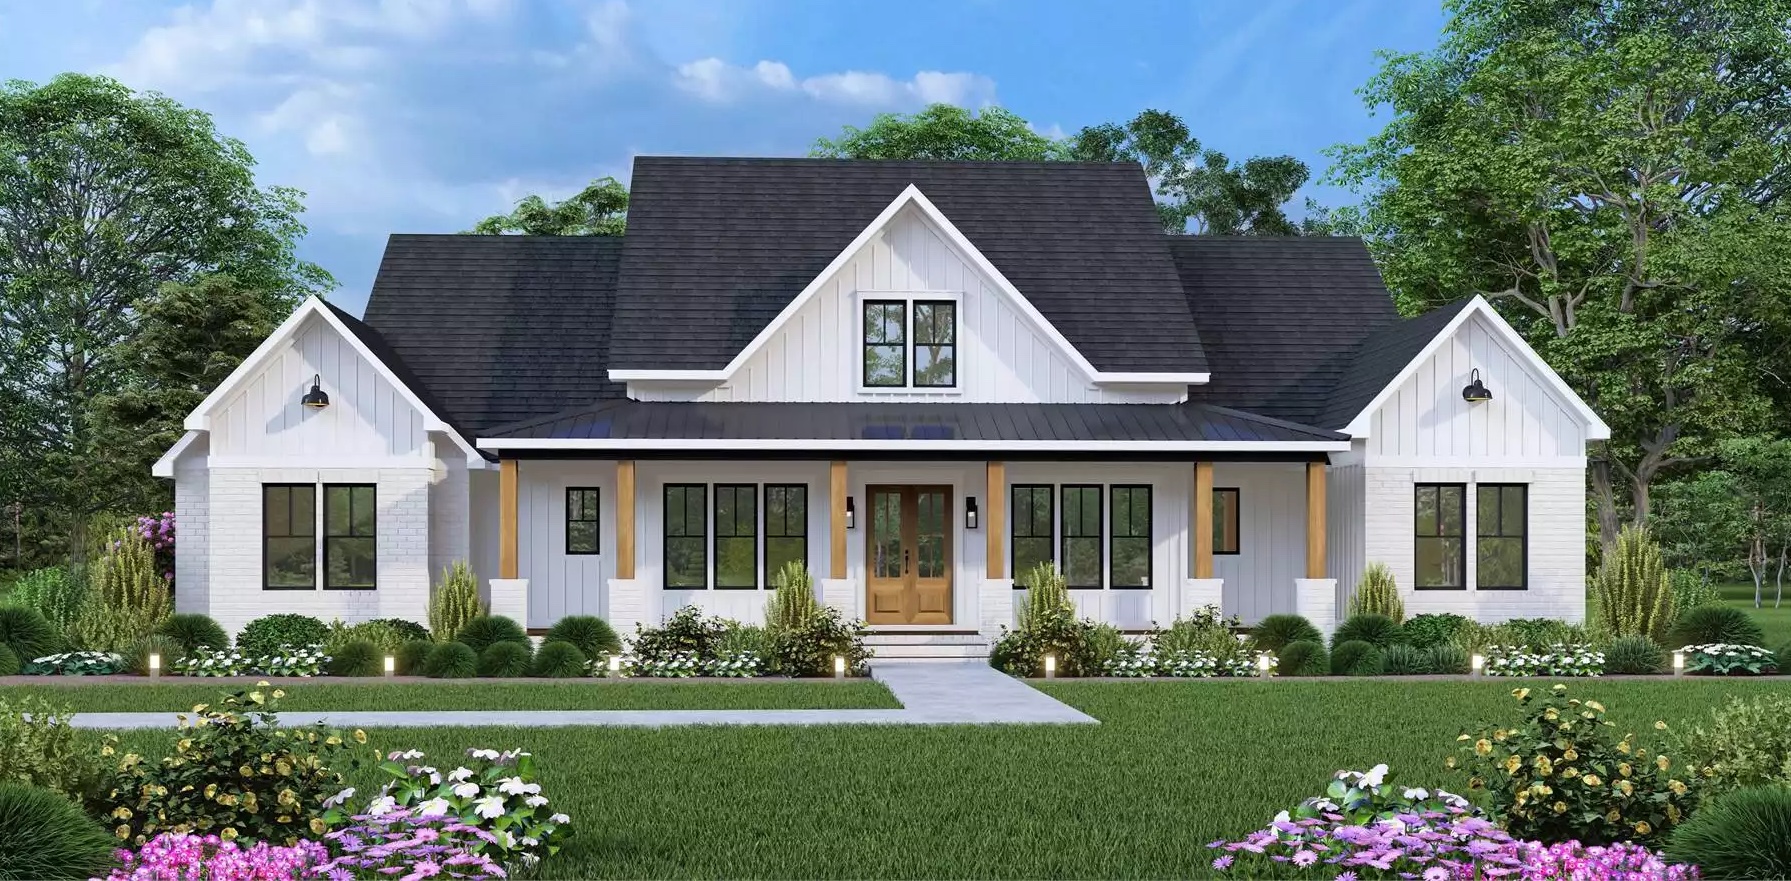 Best Selling House Plans